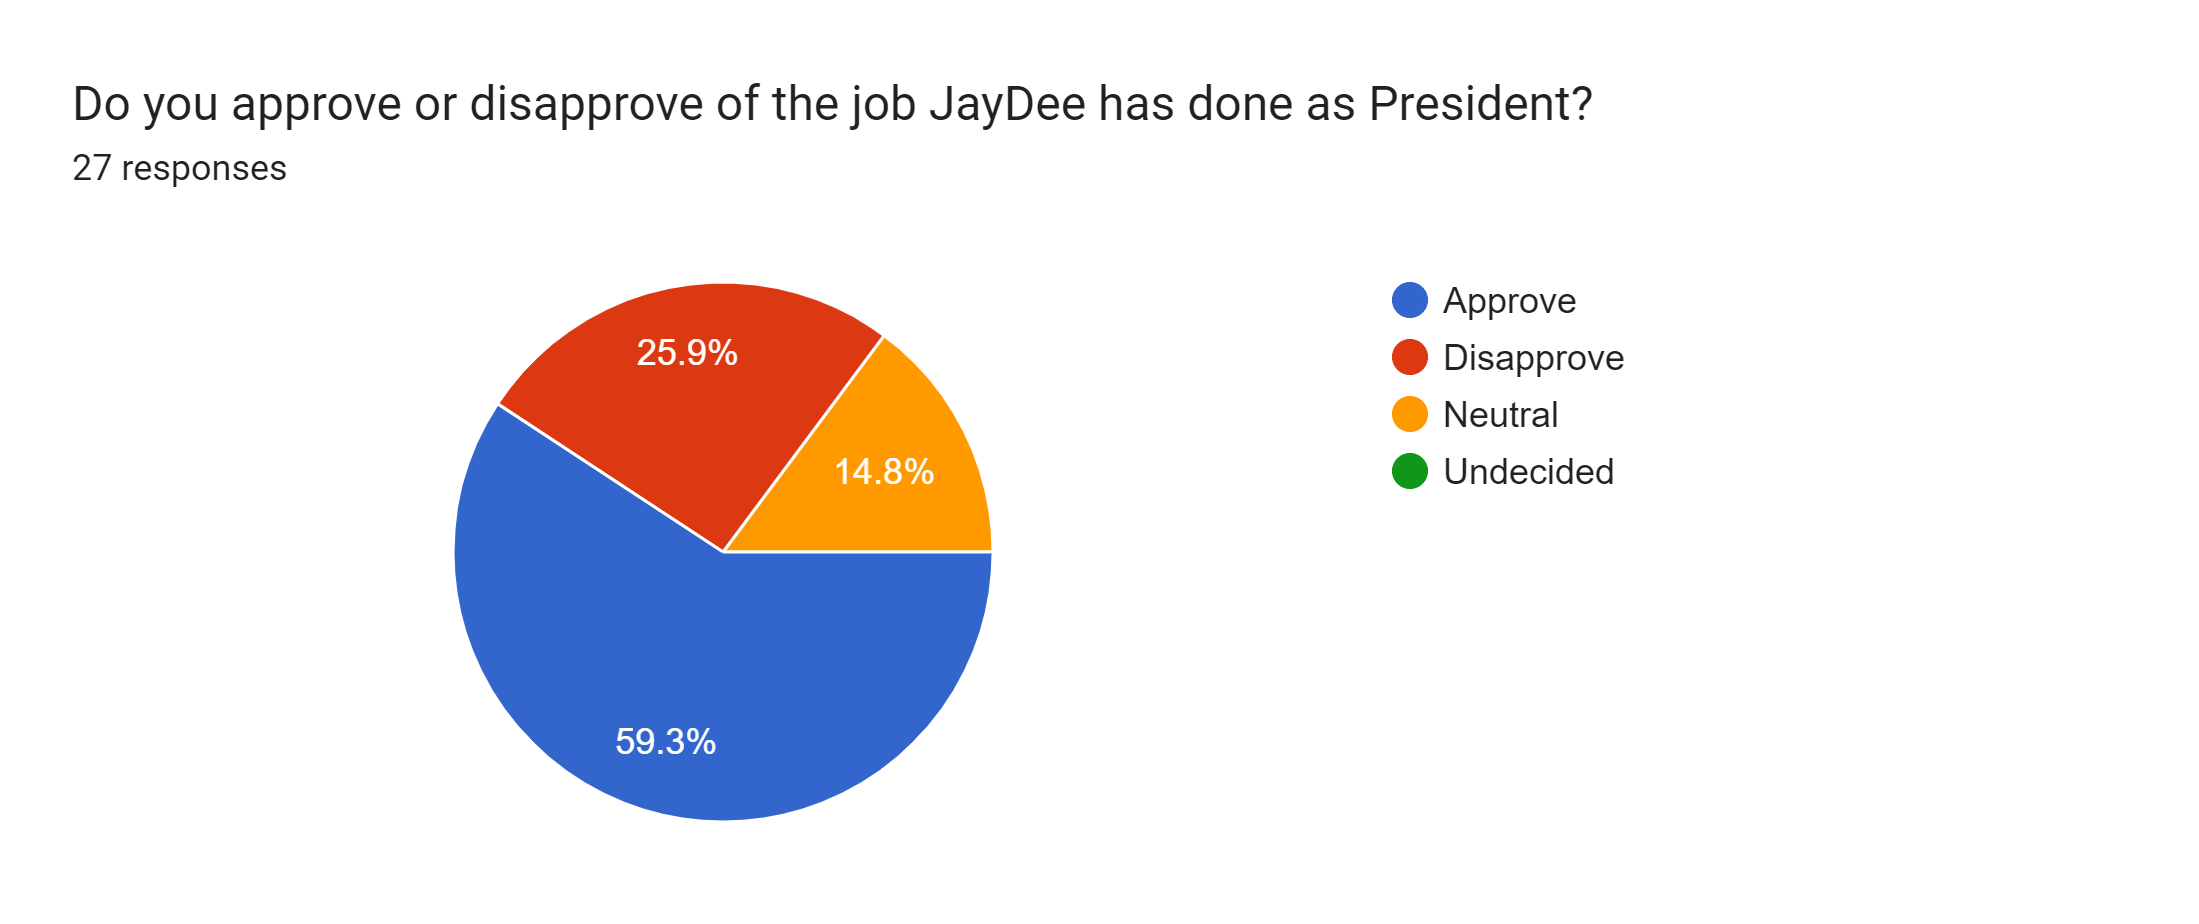 Forms response chart. Question title: Do you approve or disapprove of the job JayDee has done as President?. Number of responses: 27 responses.